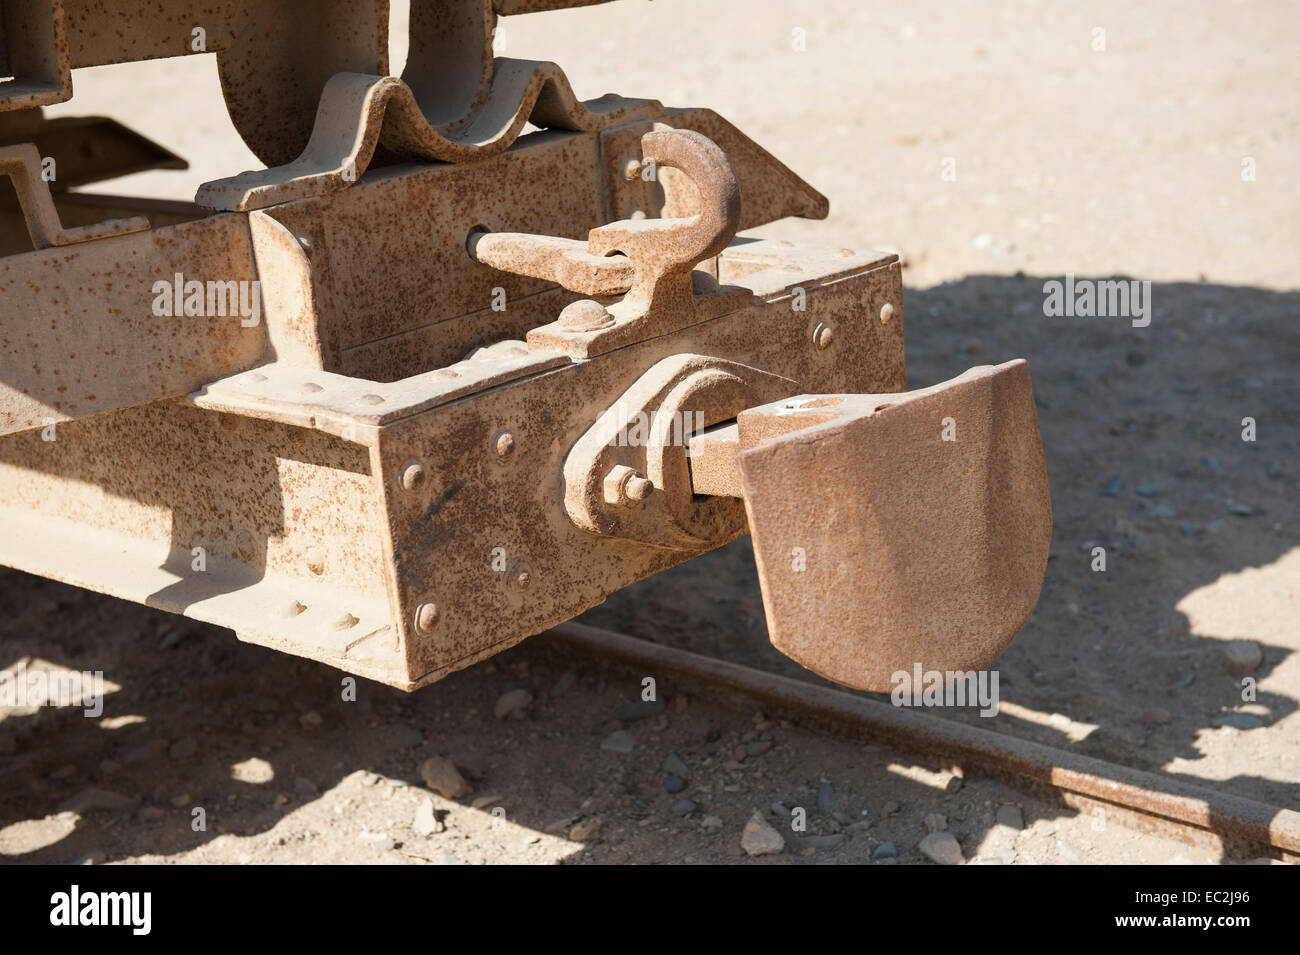 Closeup detail of coupling mechanism on old vintage railway carriage Stock Photo